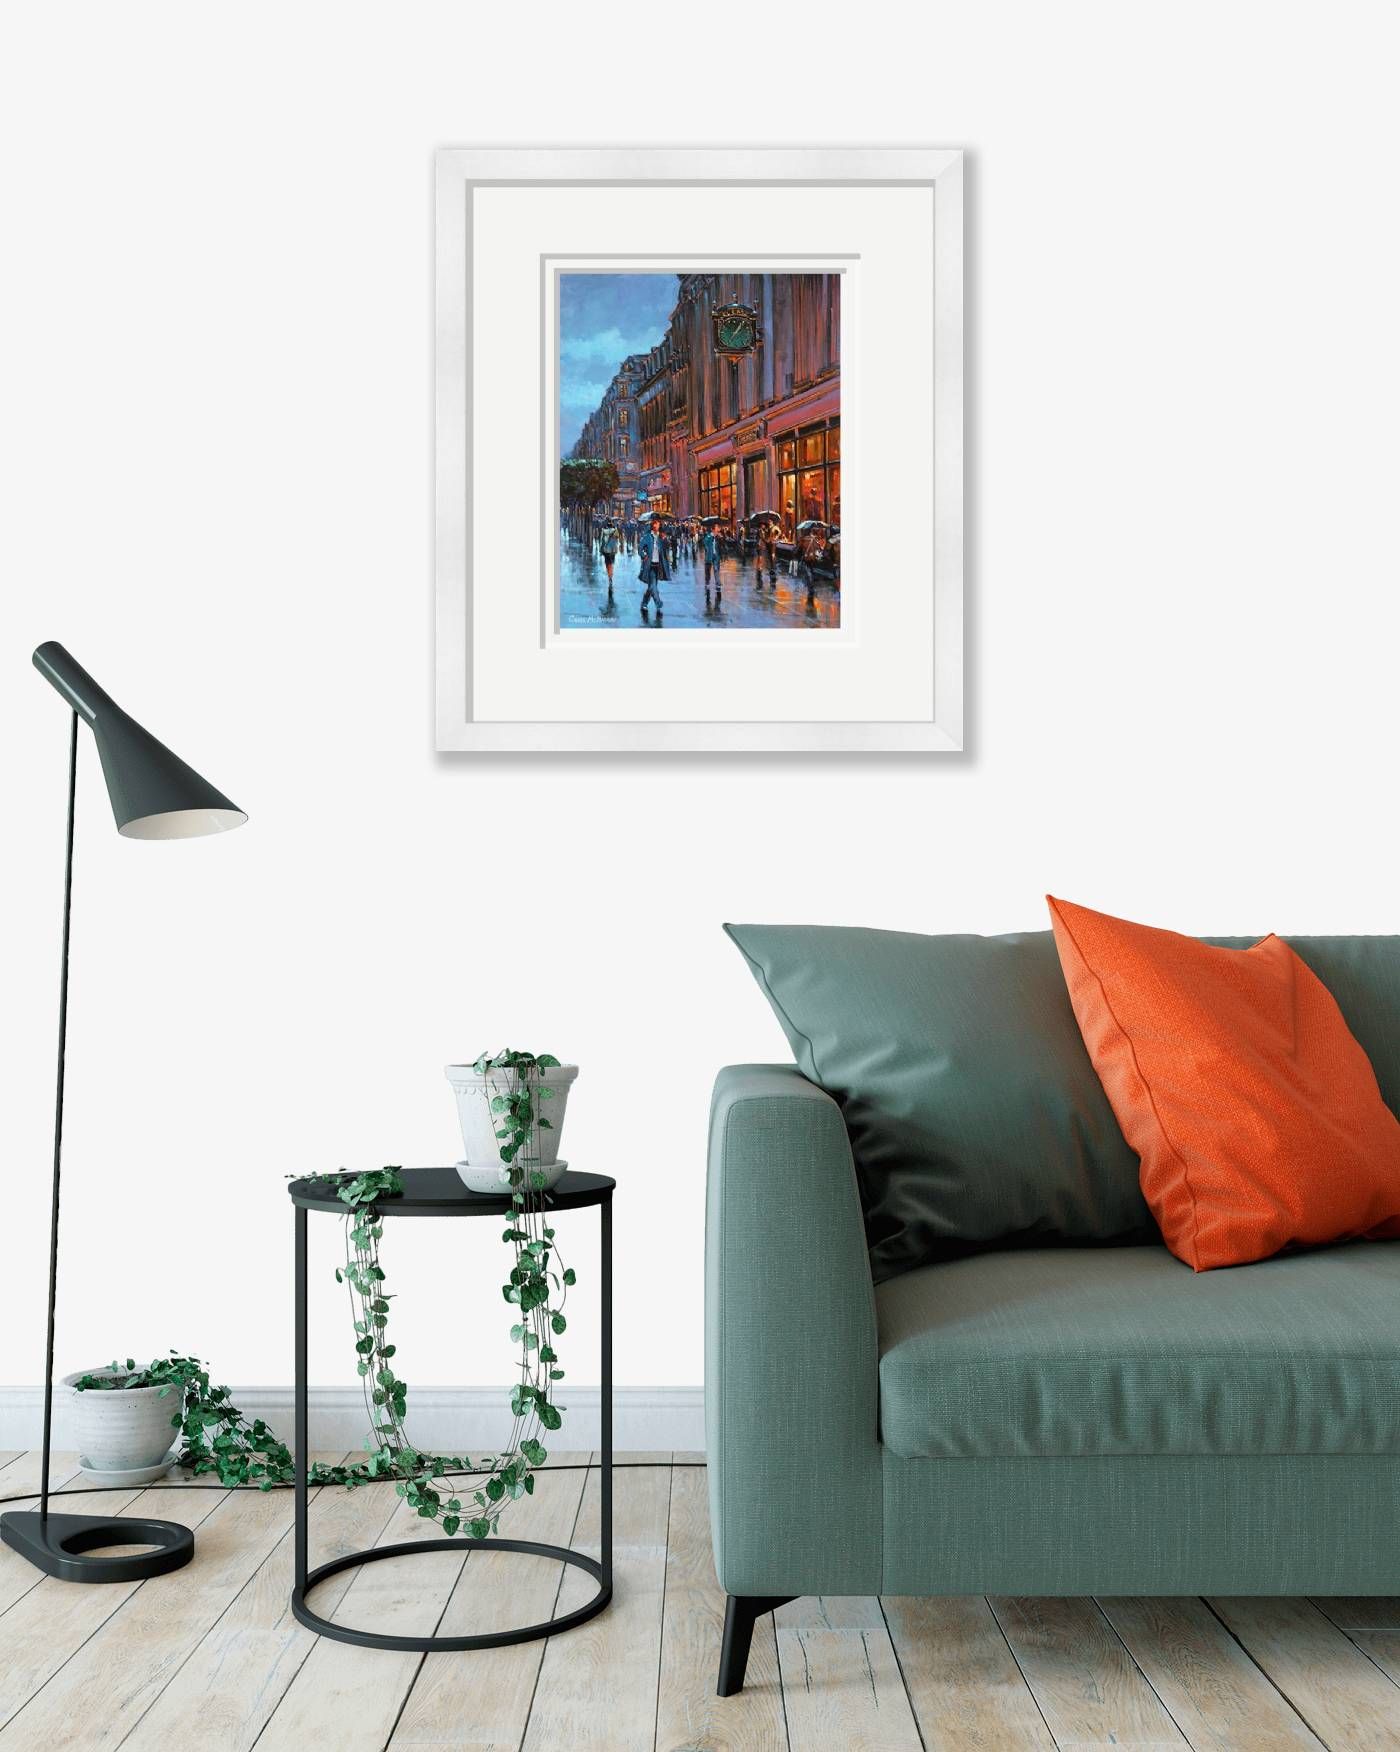 Large framed - Under Clerys Clock - 365 by Chris McMorrow